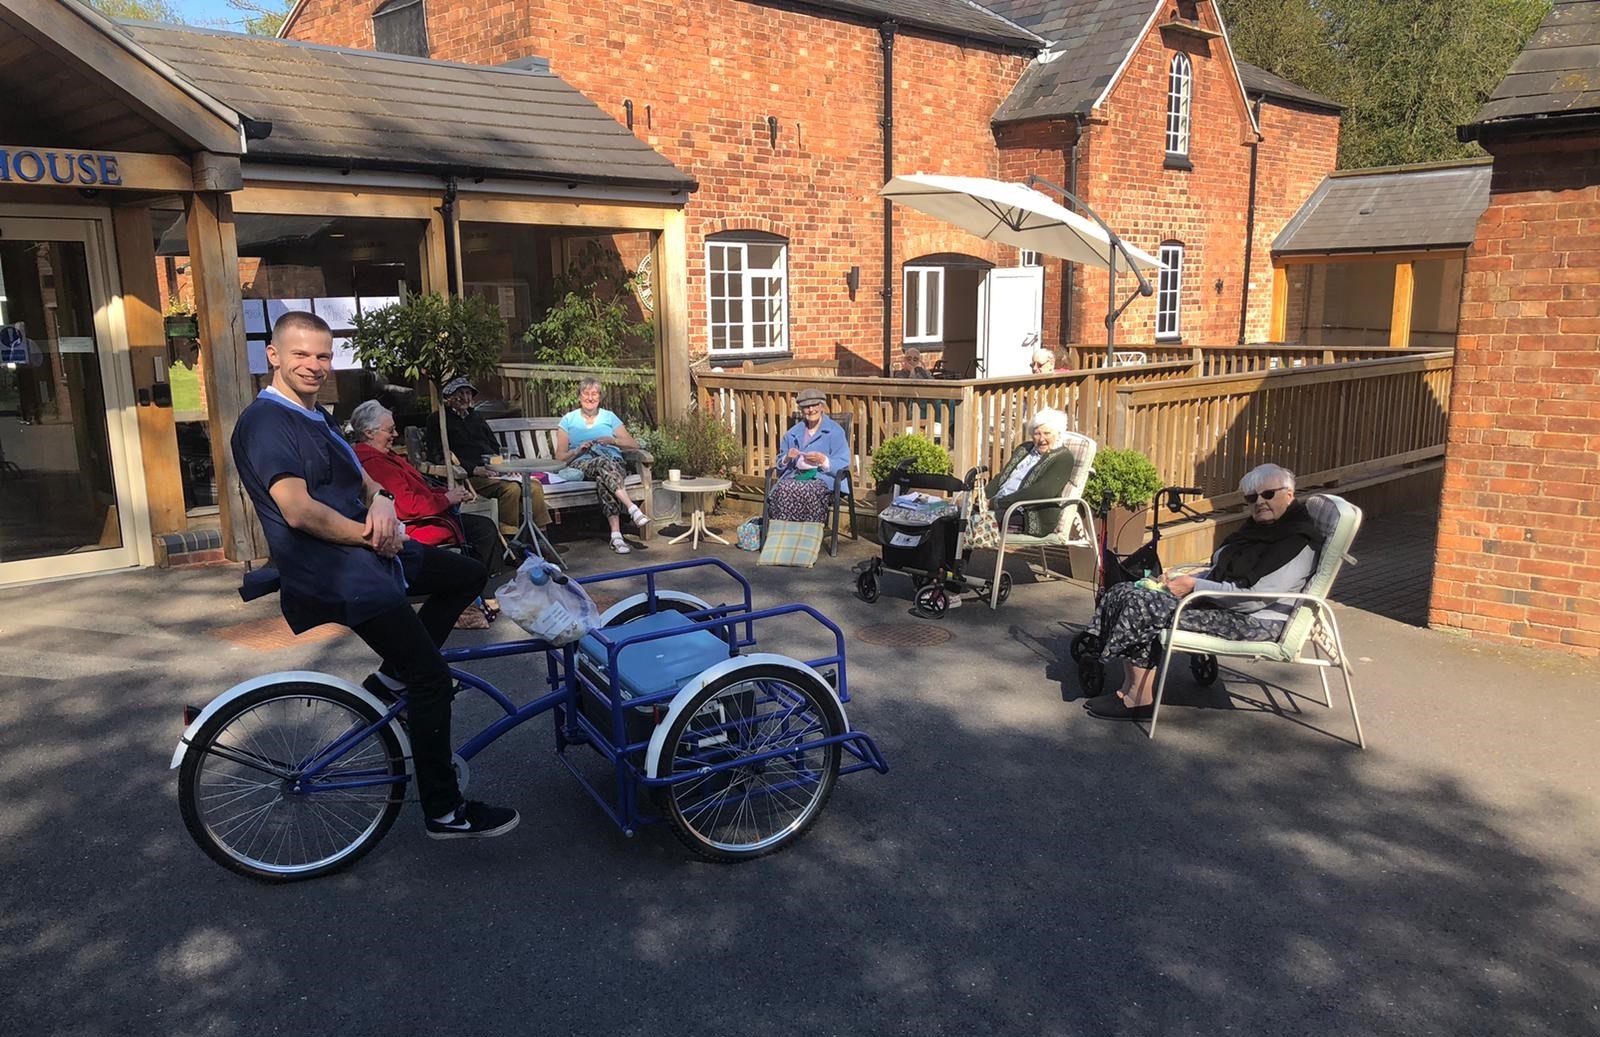 CCH Image showing the residents of Eden House enjoying the outdoors